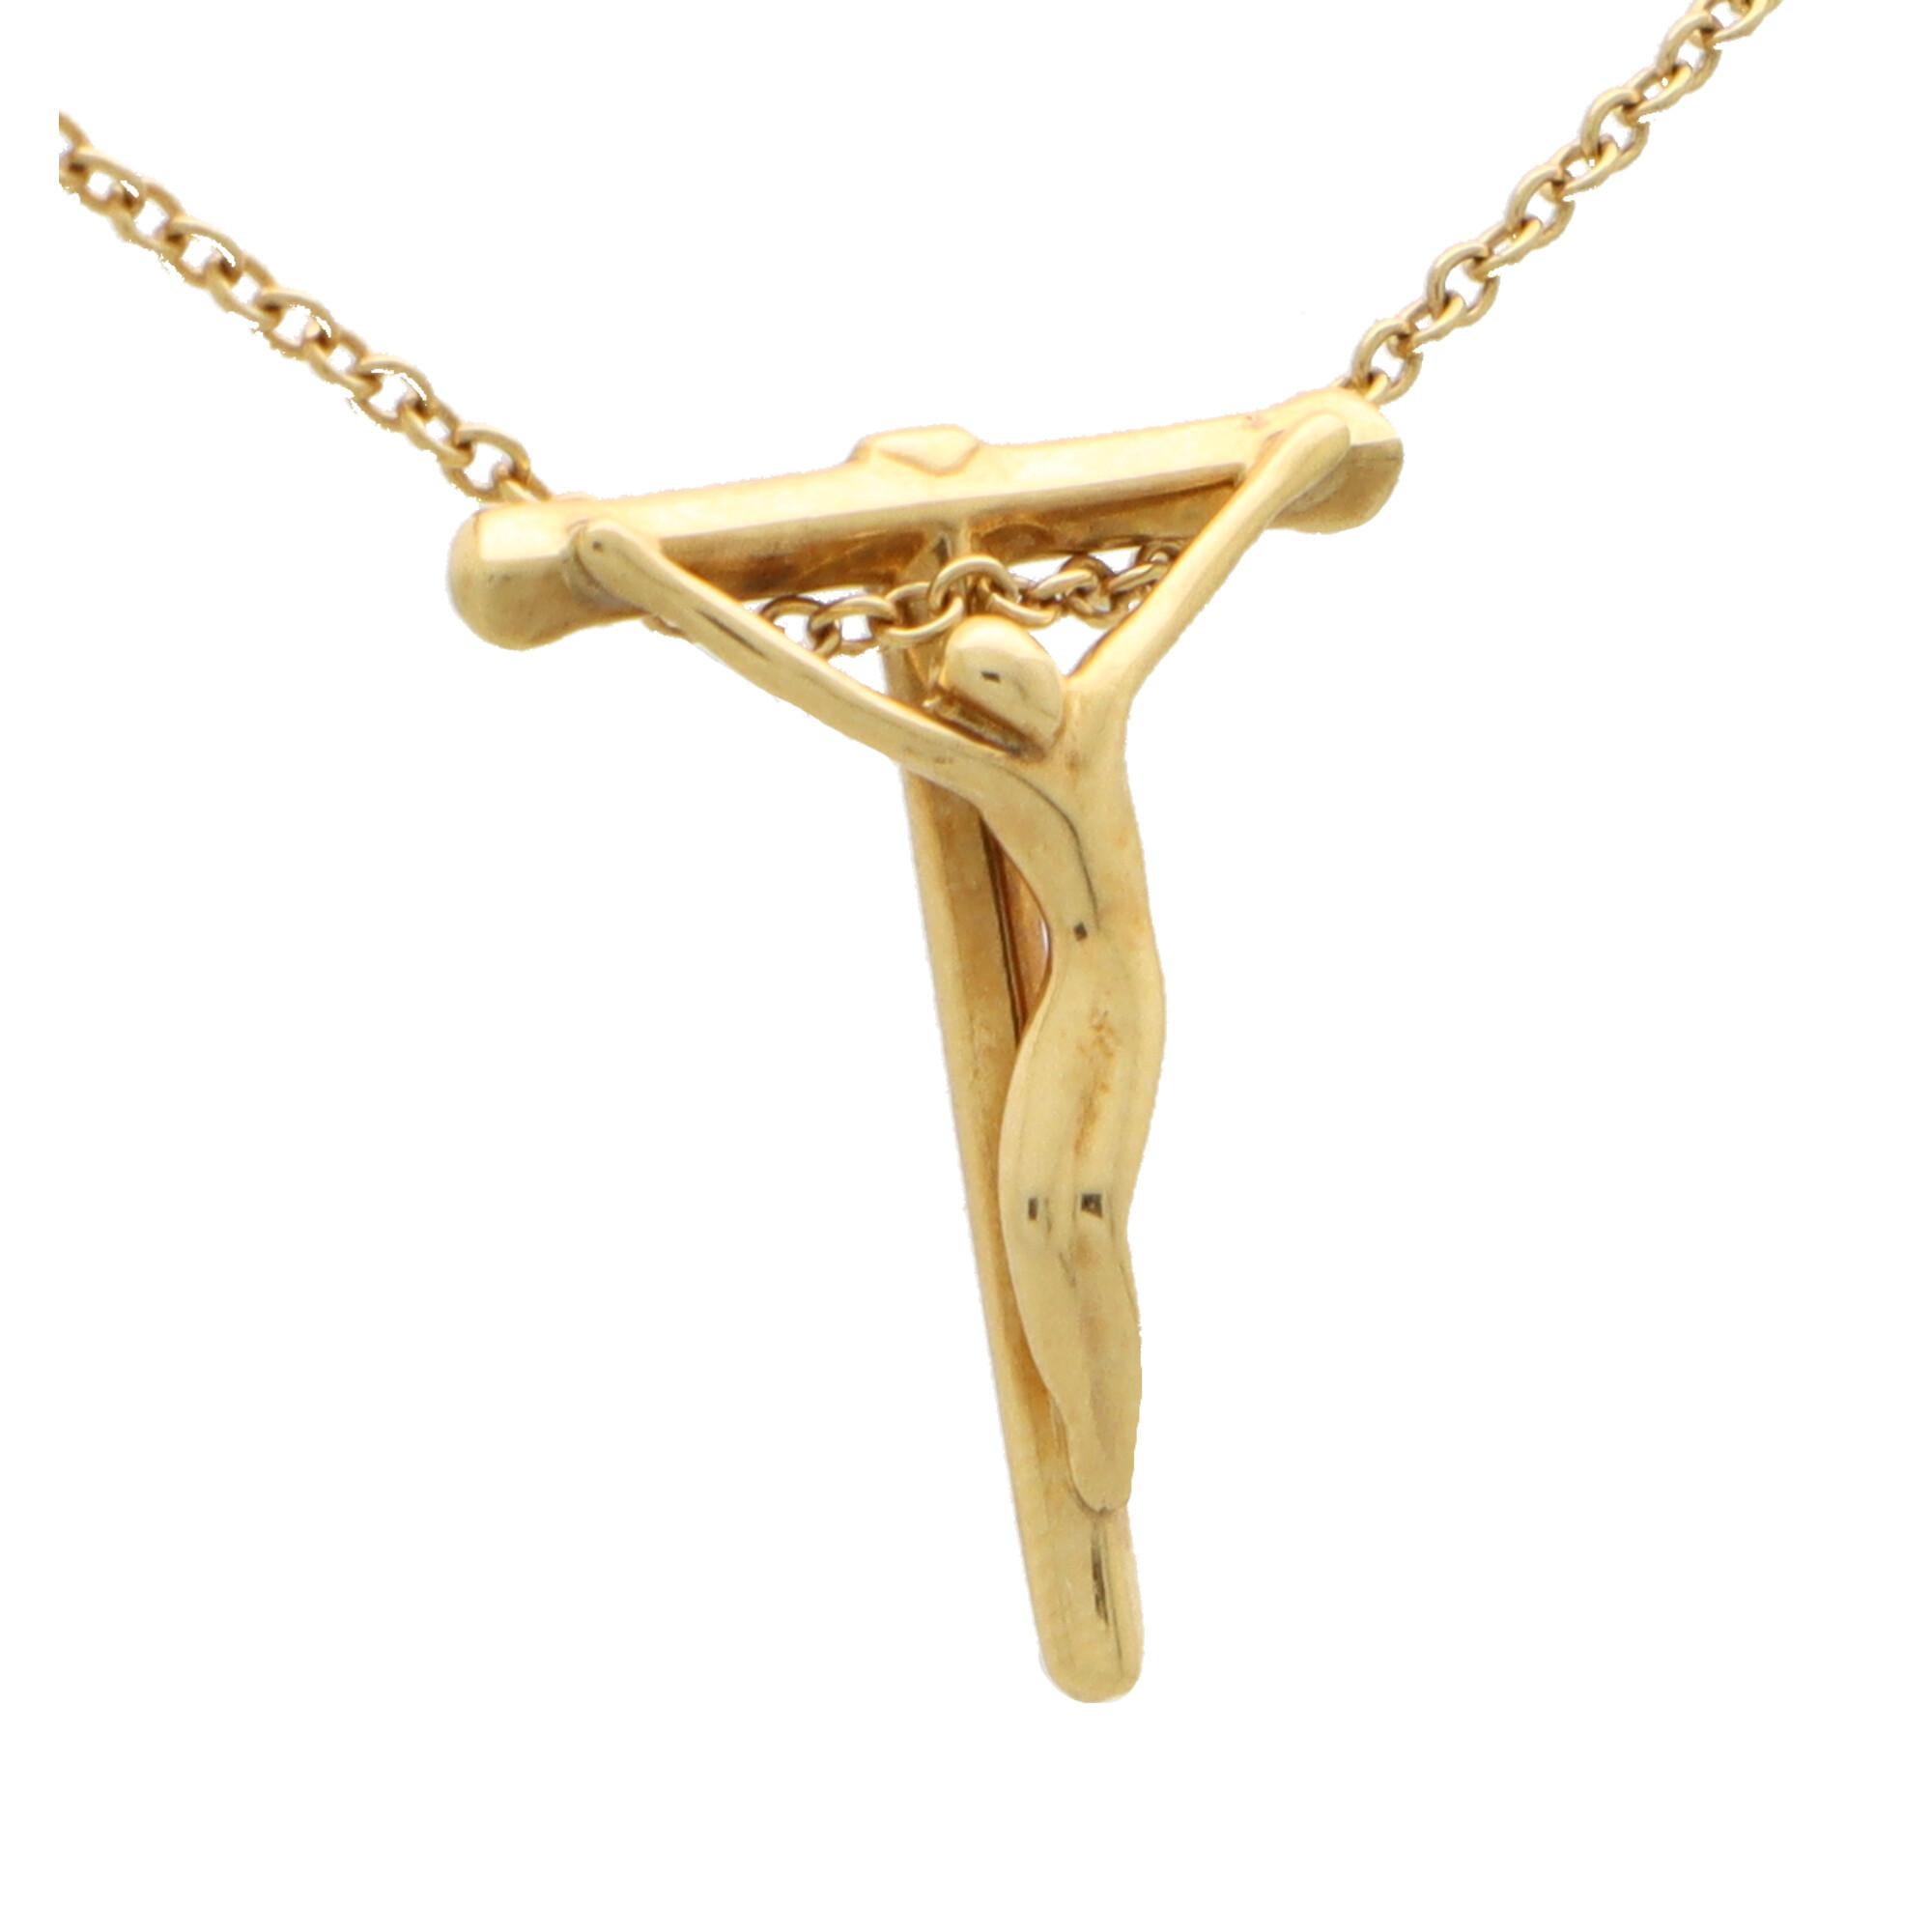 Modern Vintage Elsa Peretti for Tiffany & Co. Crucifix Necklace in 18k Yellow Gold